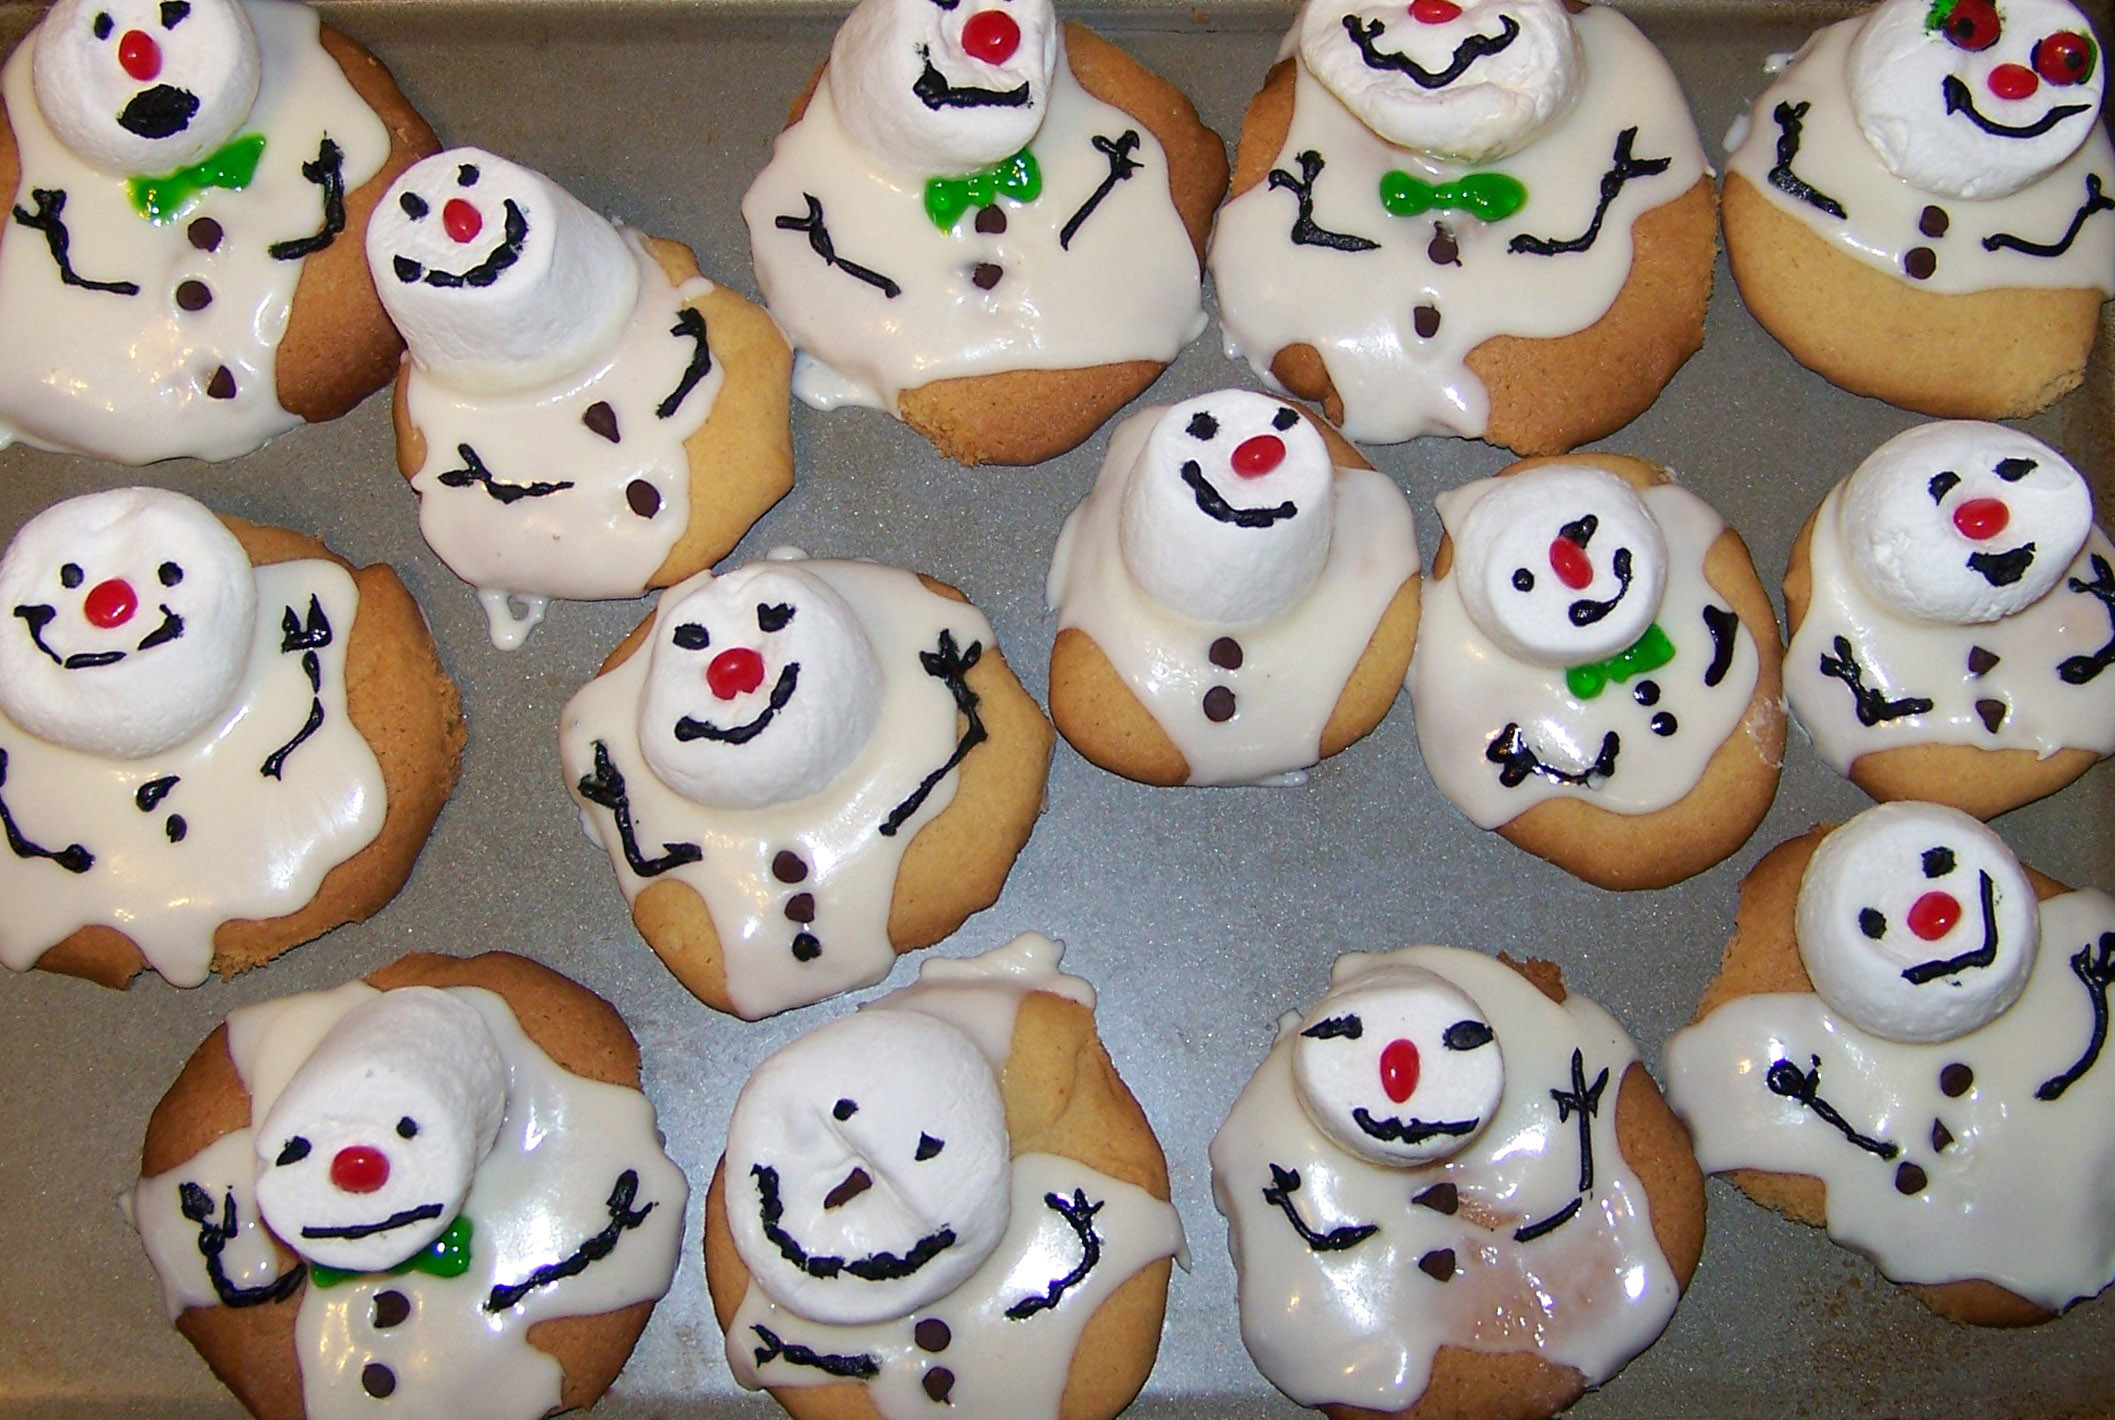 Snowman Holiday Cookies image - Free stock photo - Public Domain photo ...